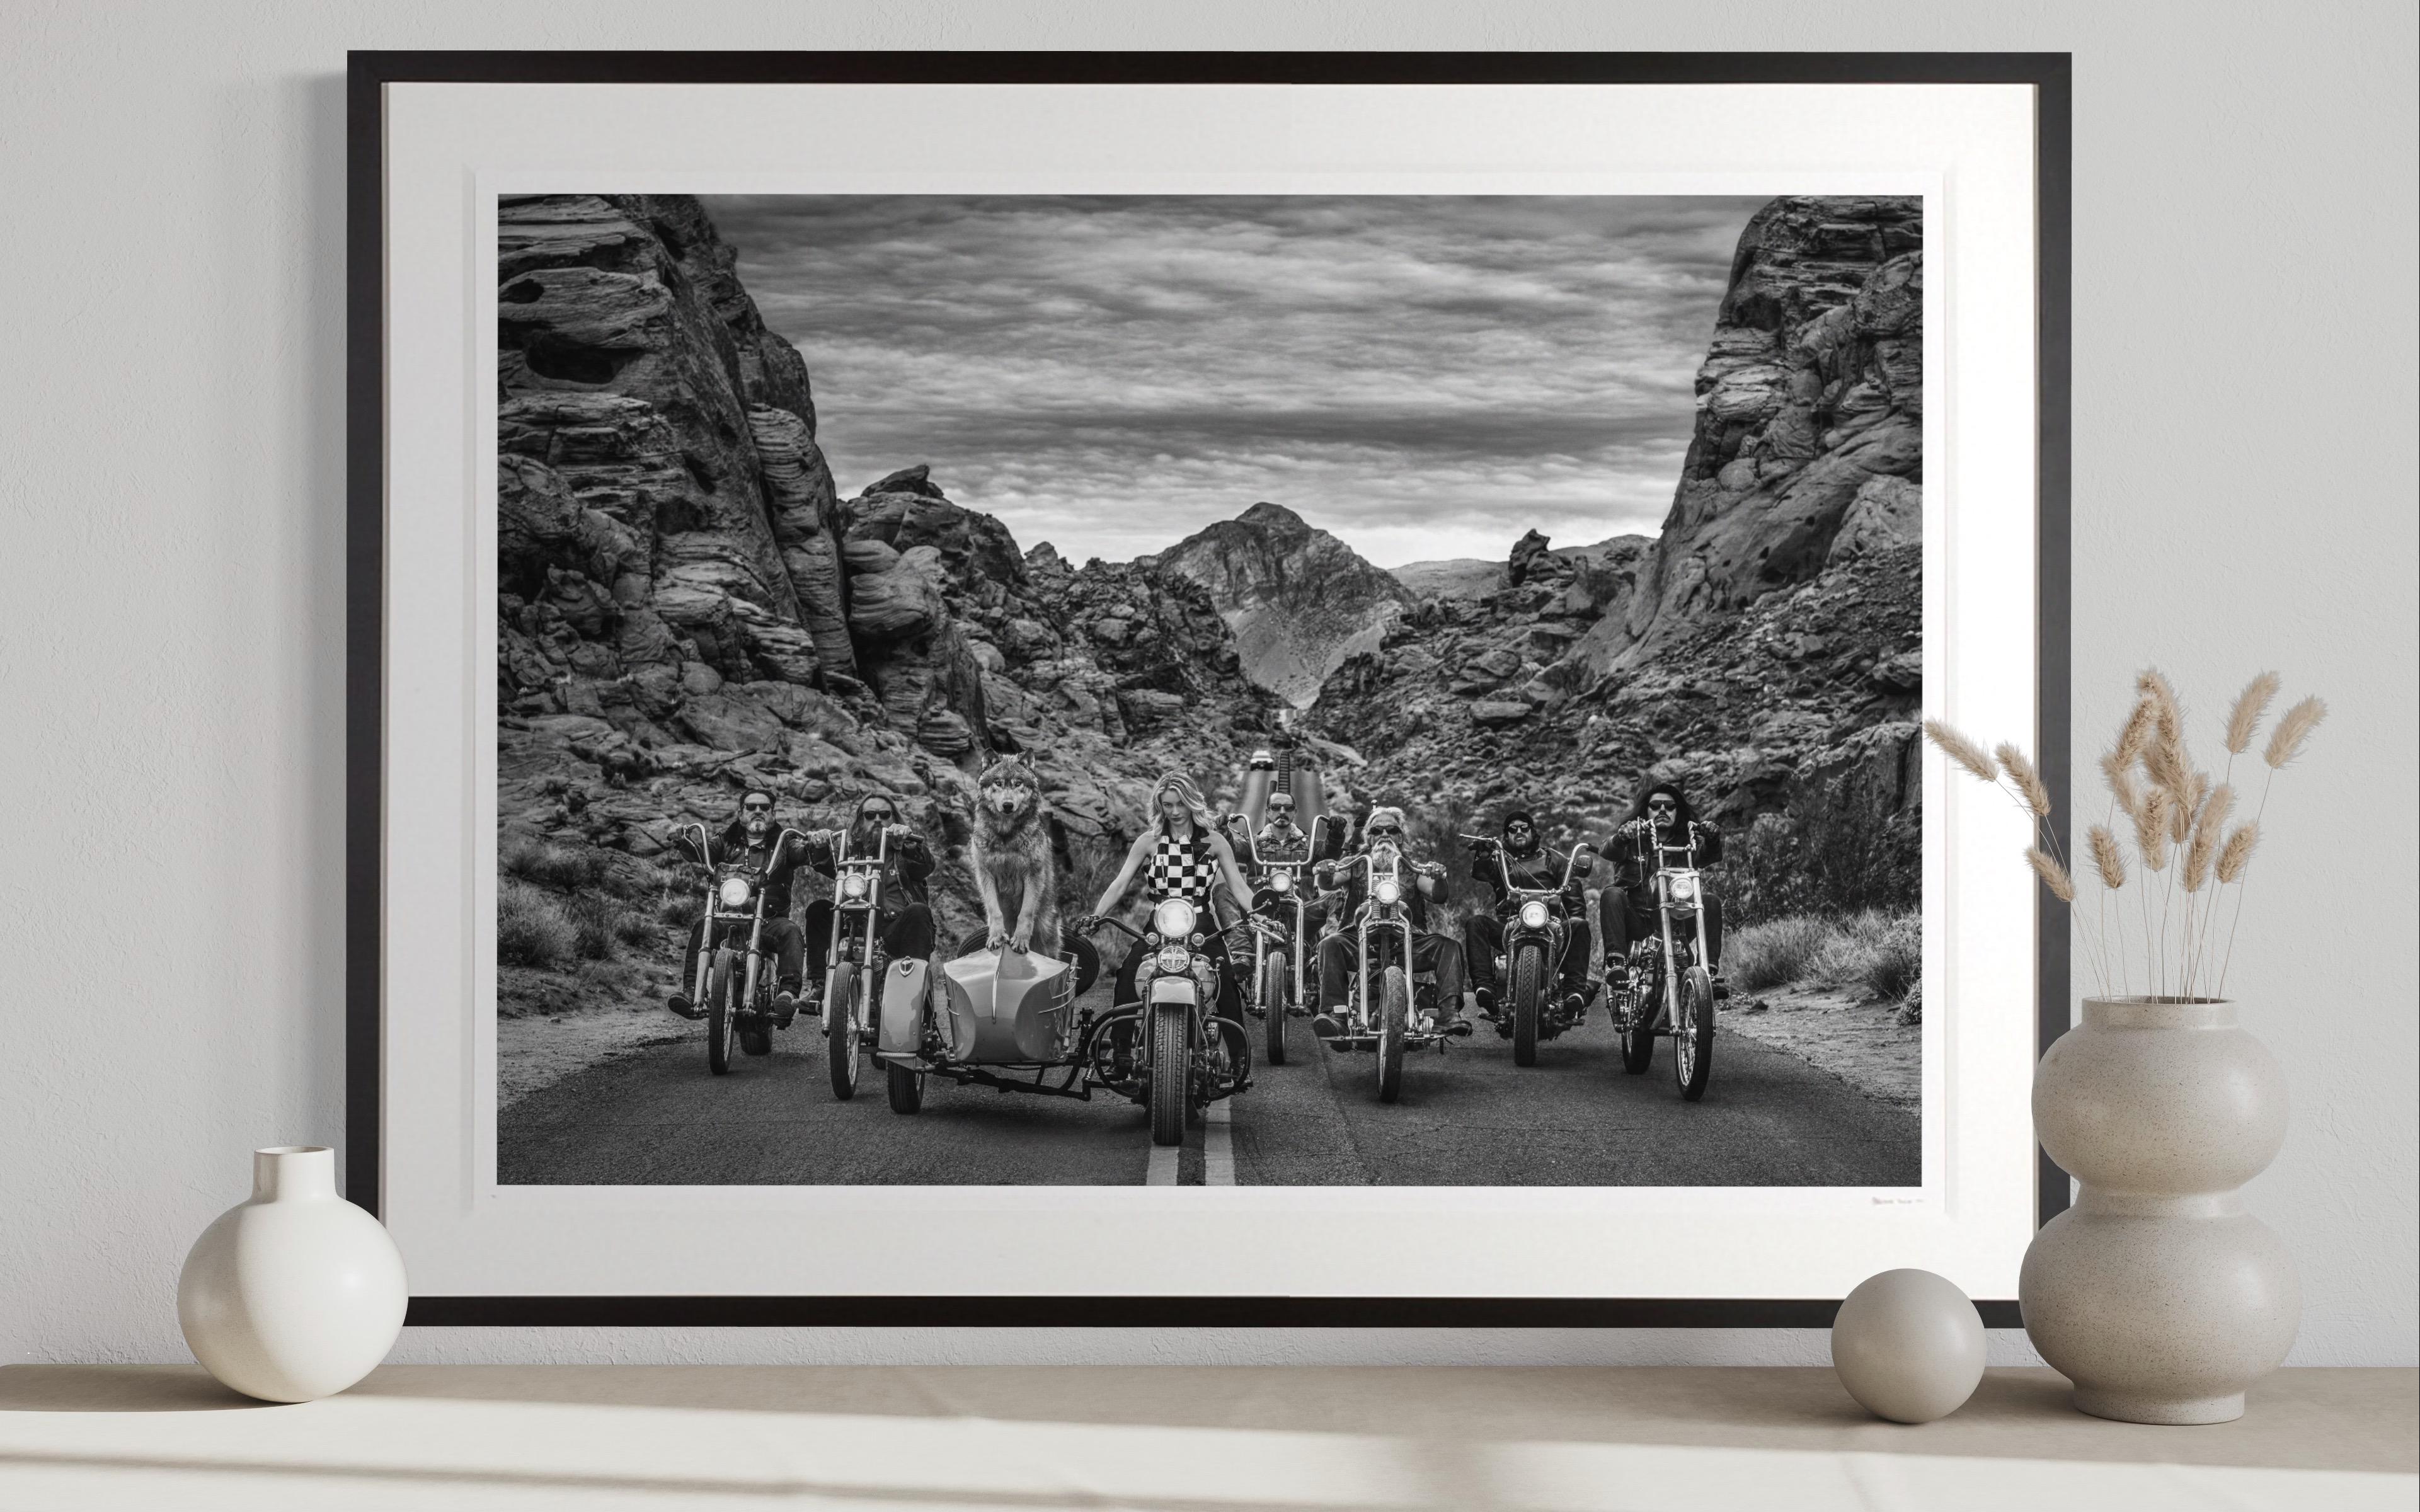 This work is sourced directly from the artist.
Framed Digital Pigment Print on Archival 315gsm Hahnemuhle Photo Rag Baryta Paper
Hand-signed by artist with Certificate of Authenticity

The Harley-Davidson is a heavyweight brand - like Coke and